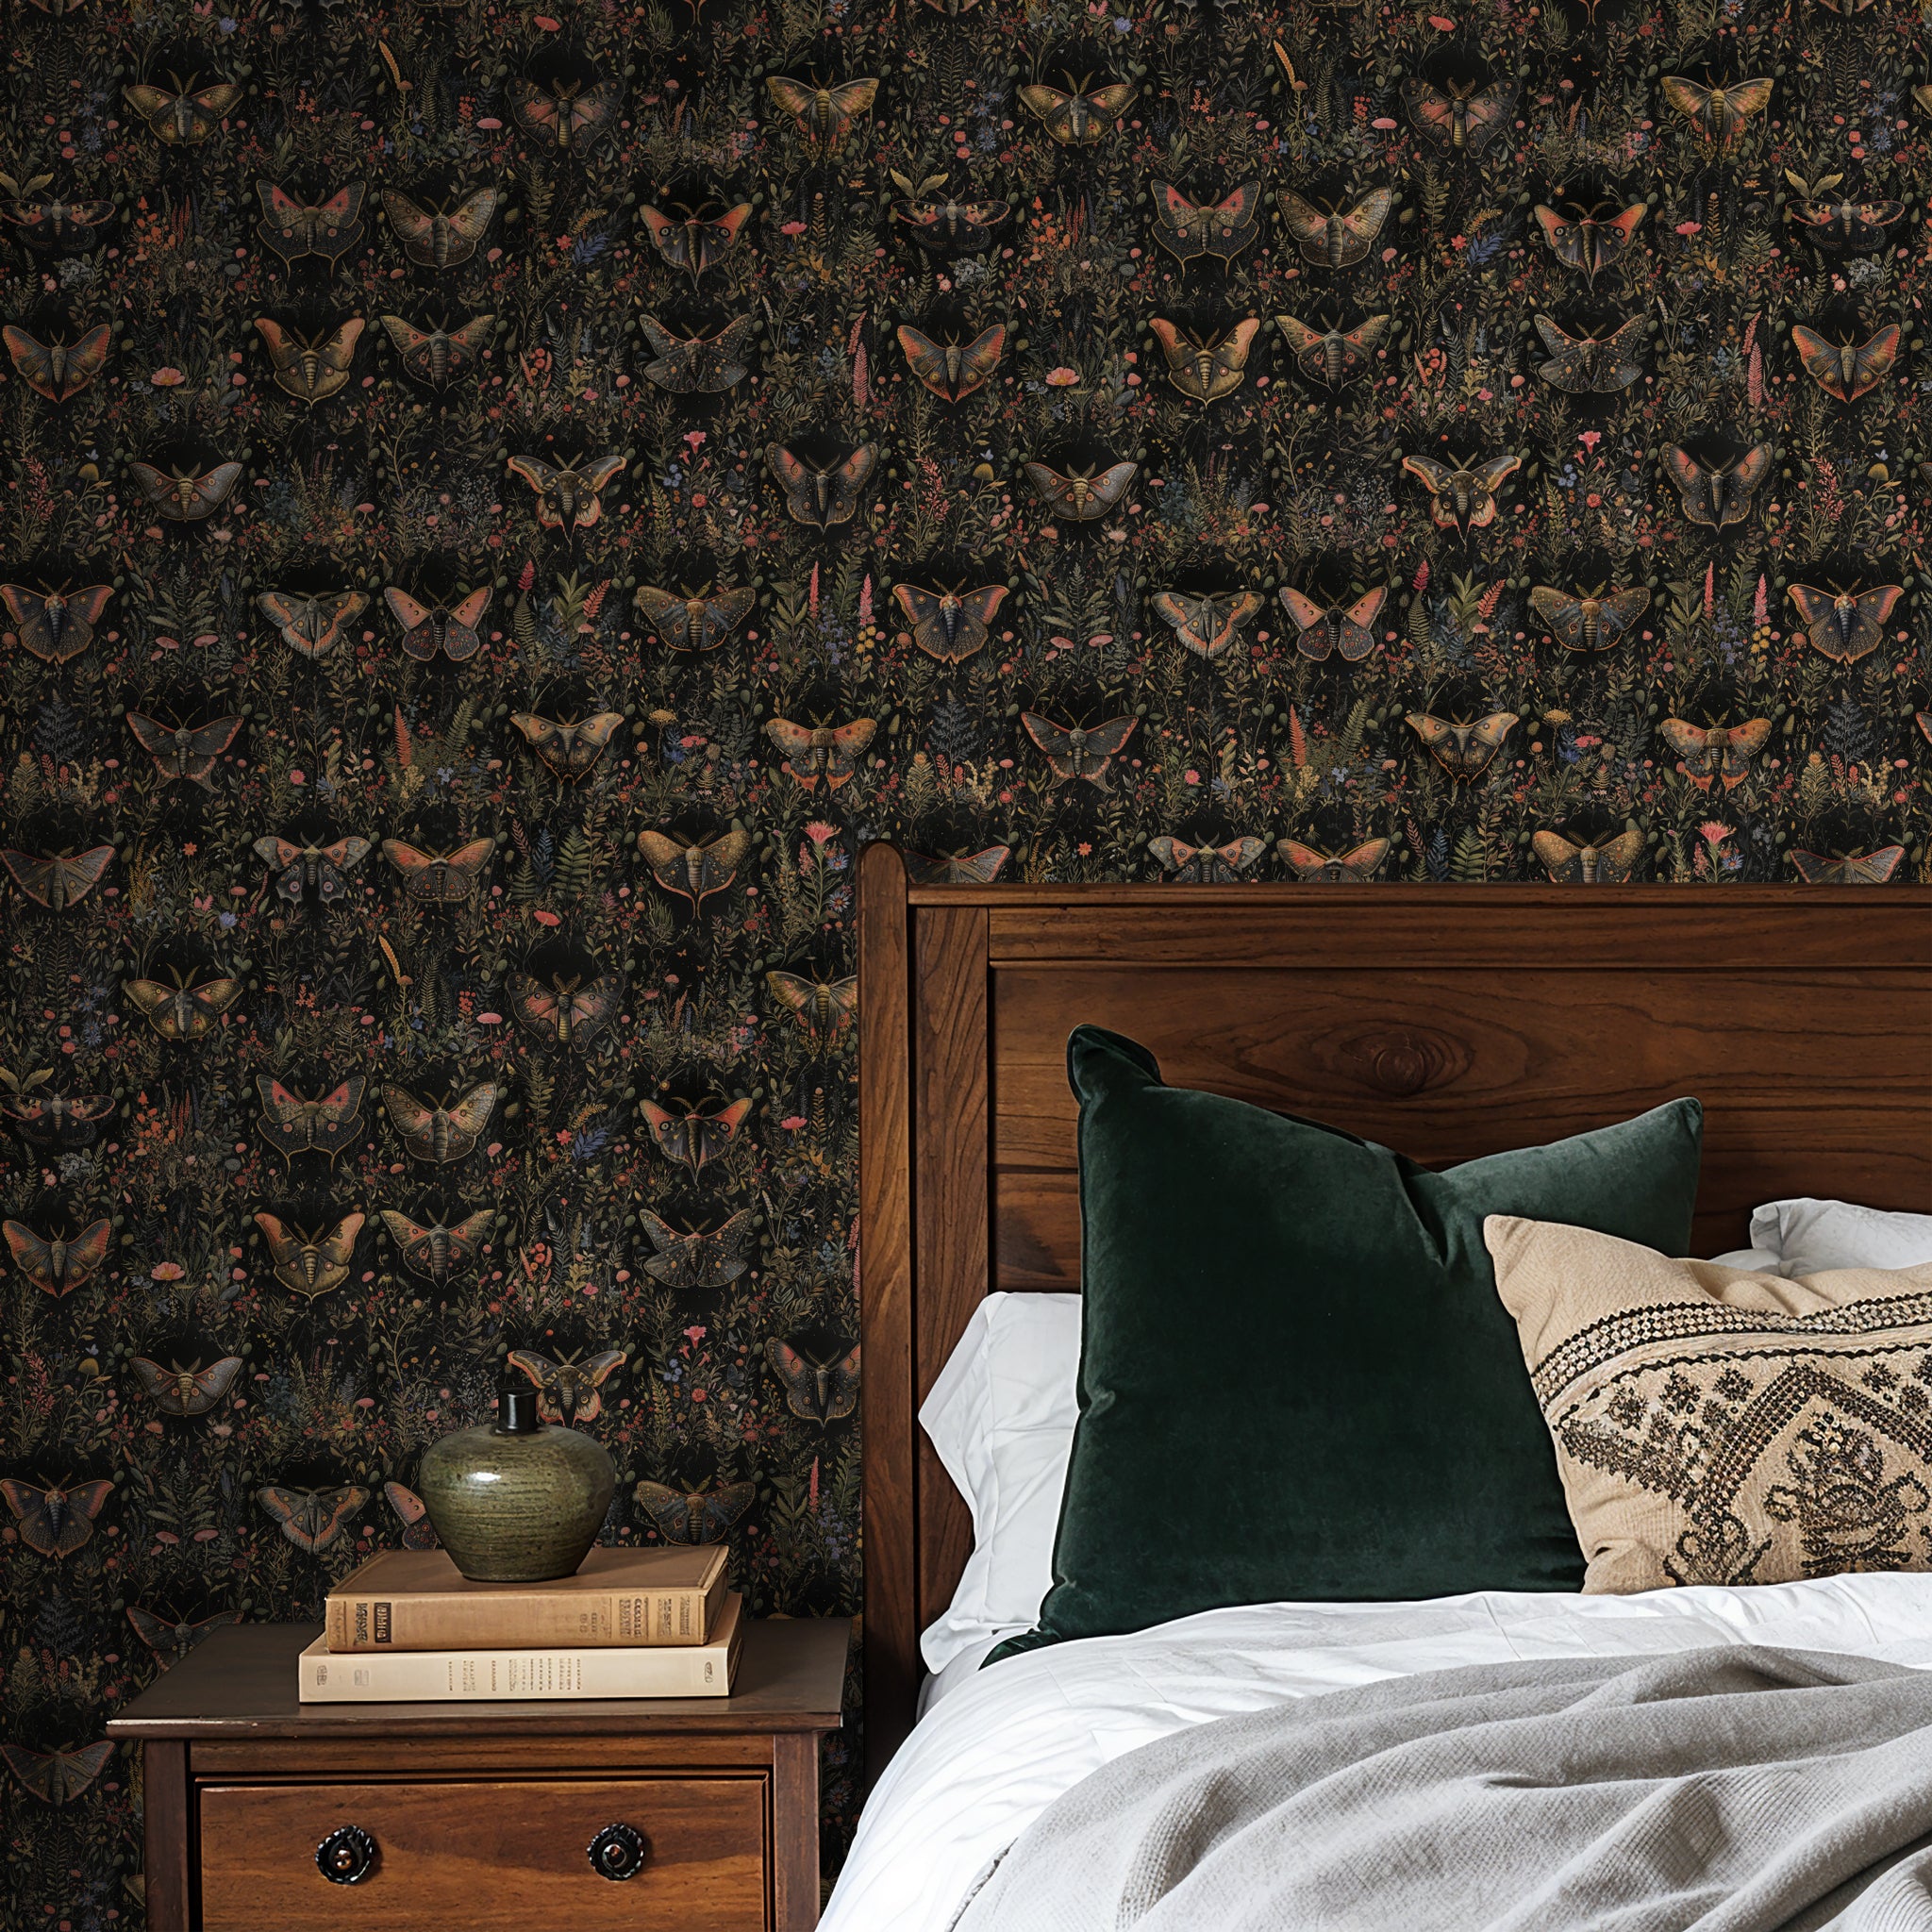 "Papillon Wallpaper by Wall Blush in cozy bedroom, featuring dark butterfly design as the focal point."